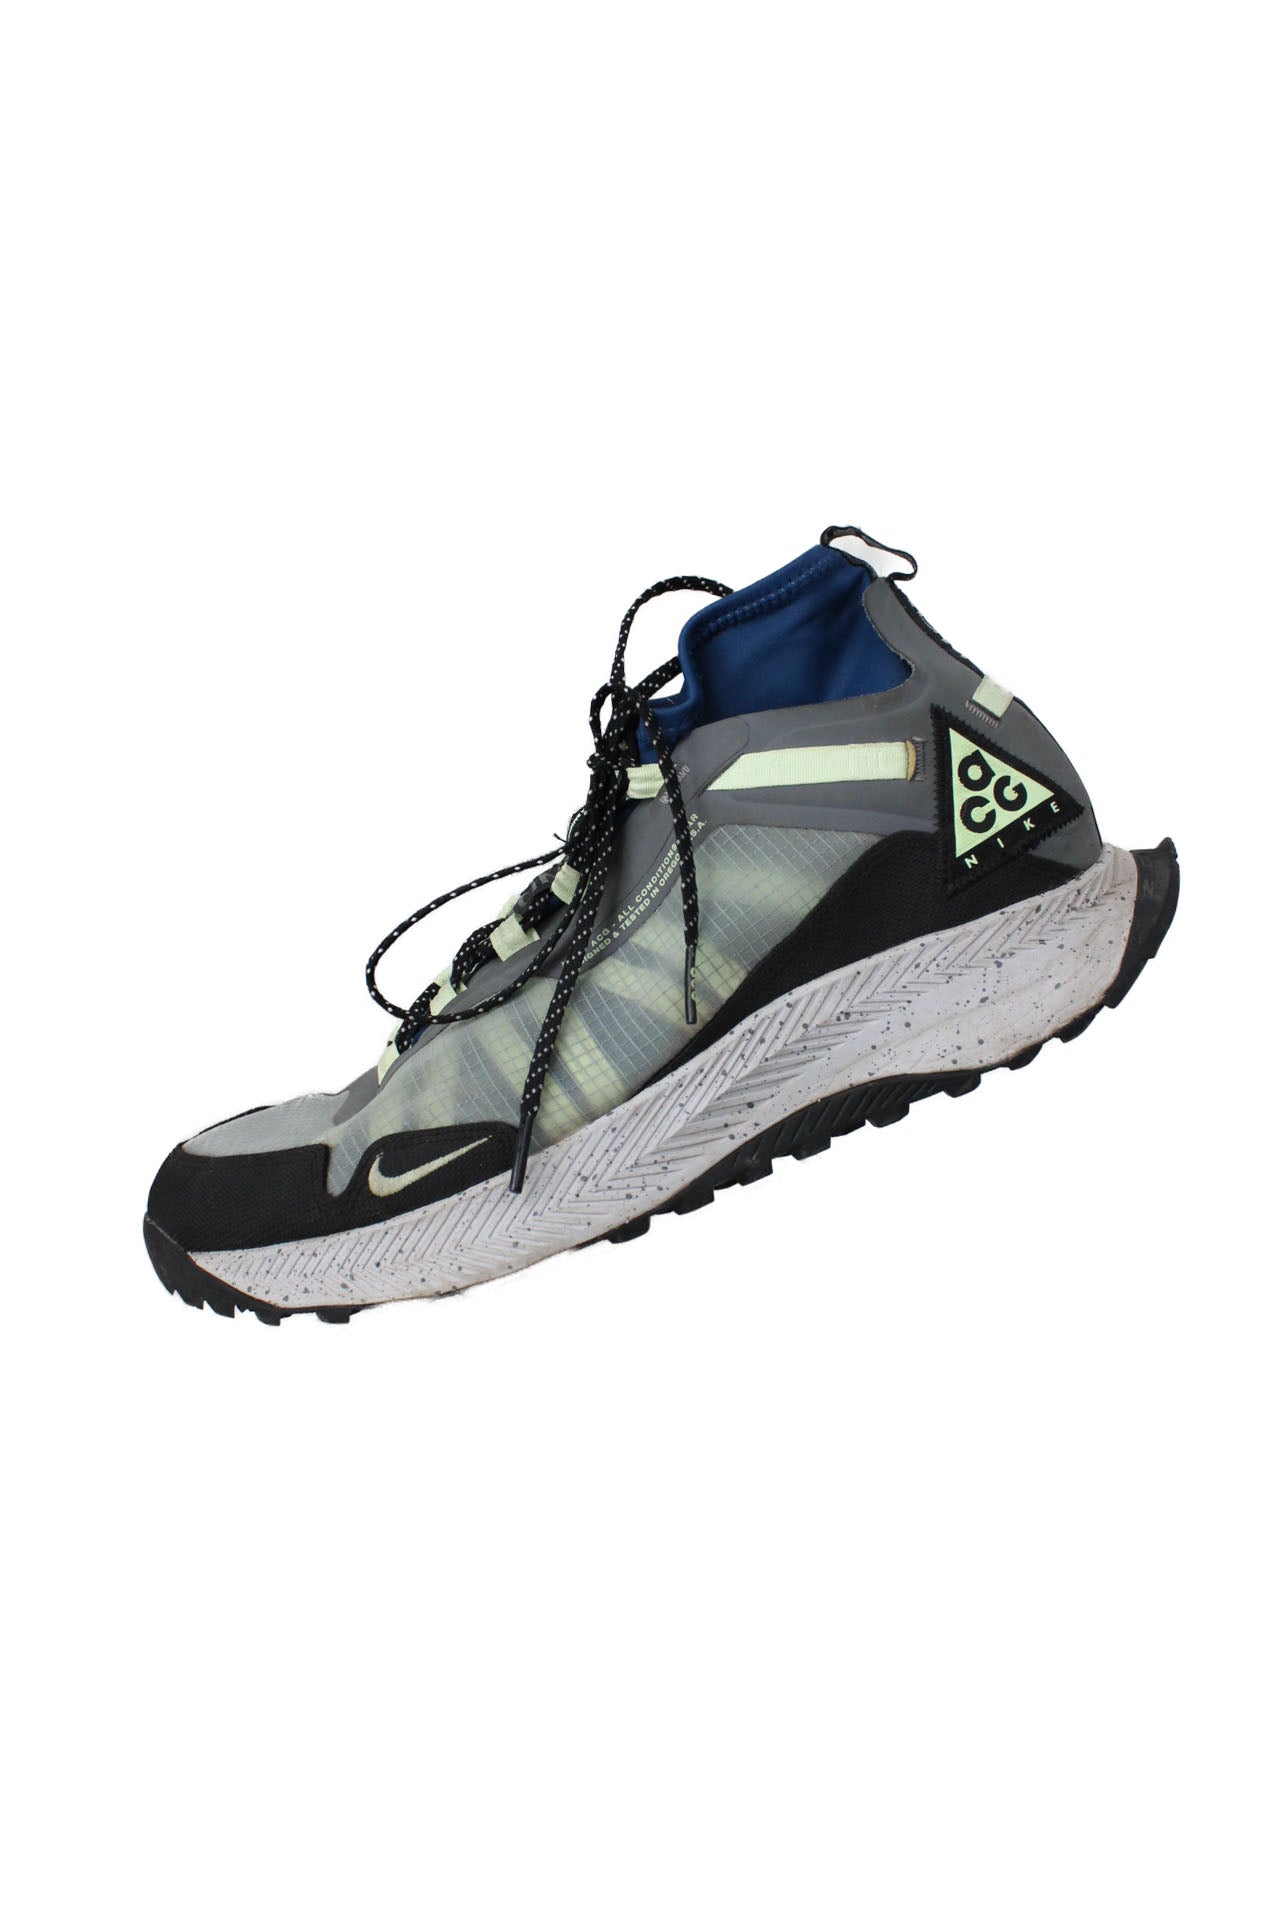 side view of nike acg grey/black/blue ‘terra zaherra barely volt’ shoes. features ‘nike acg’ logo tag at tongue/quarter, signature swoosh at outersides, ‘acg’ printed at innersides, and top reflective lace closure.